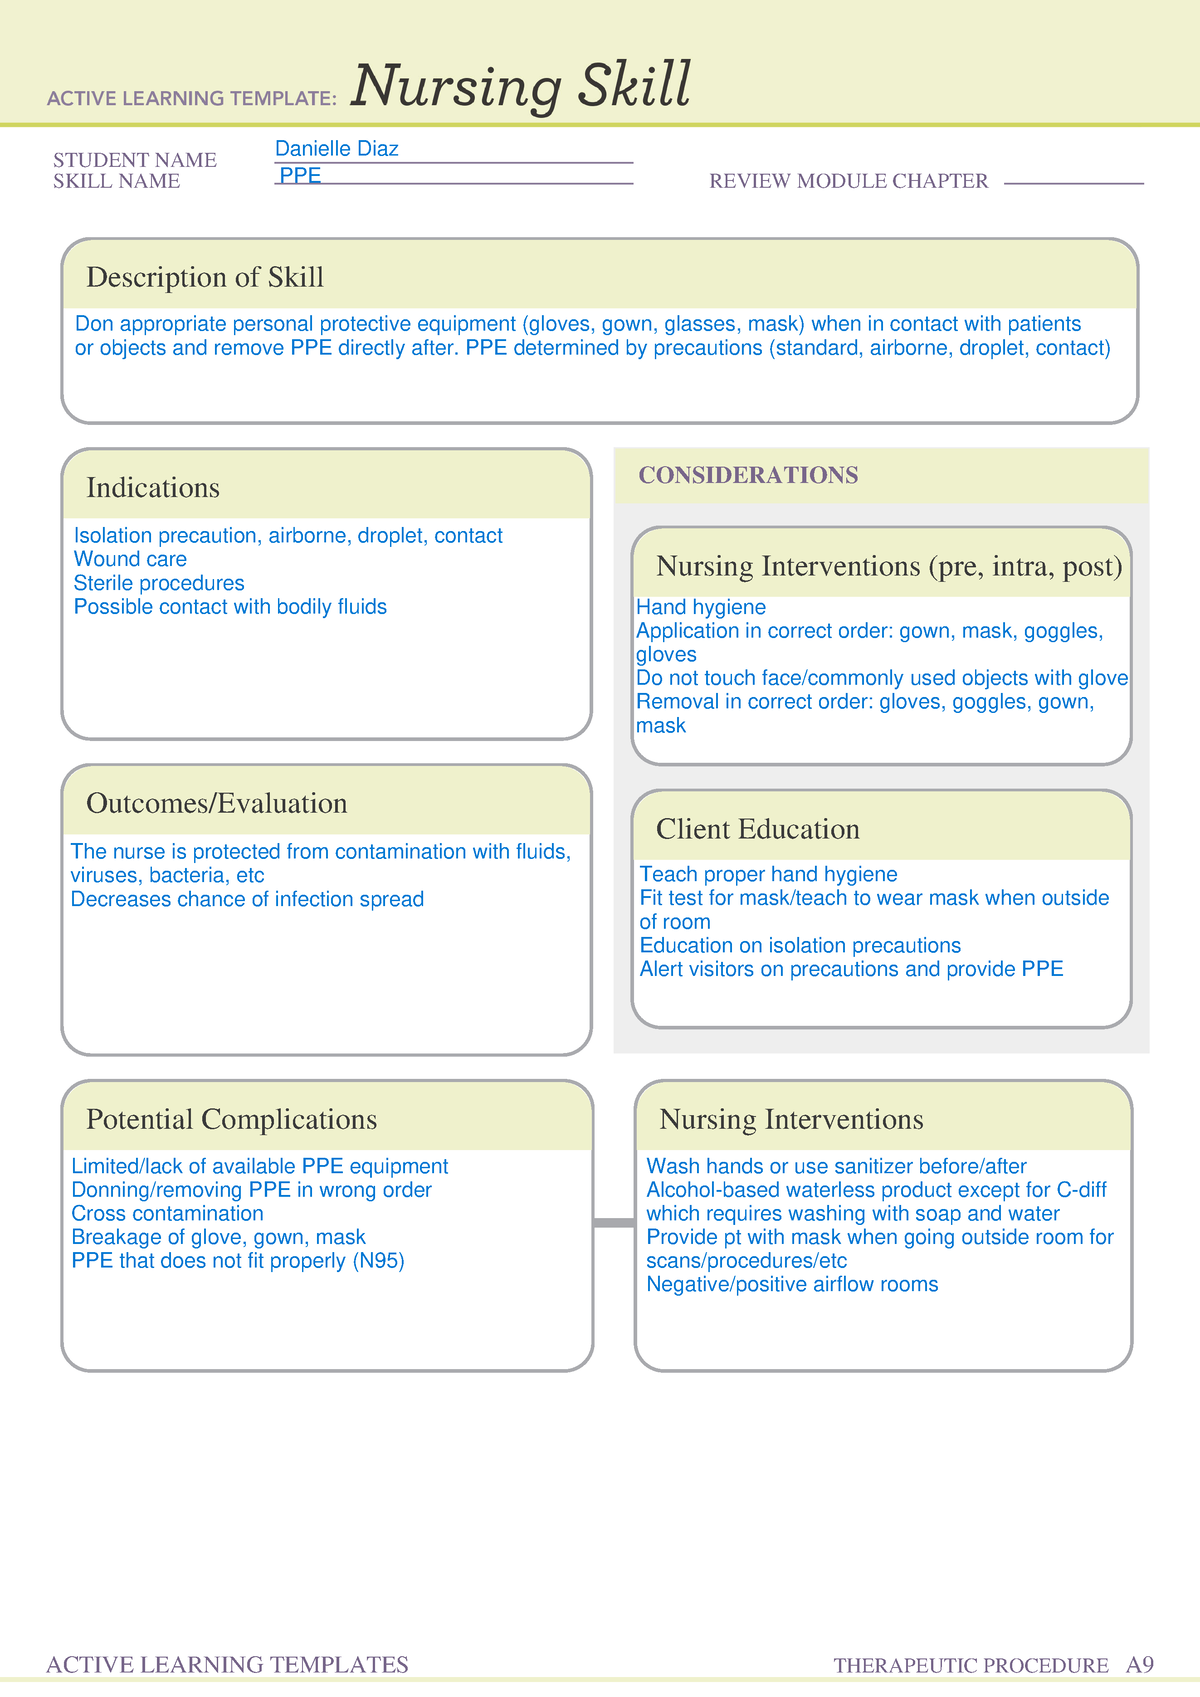 ppe-nursing-skill-active-learning-template-ati-remediation-student